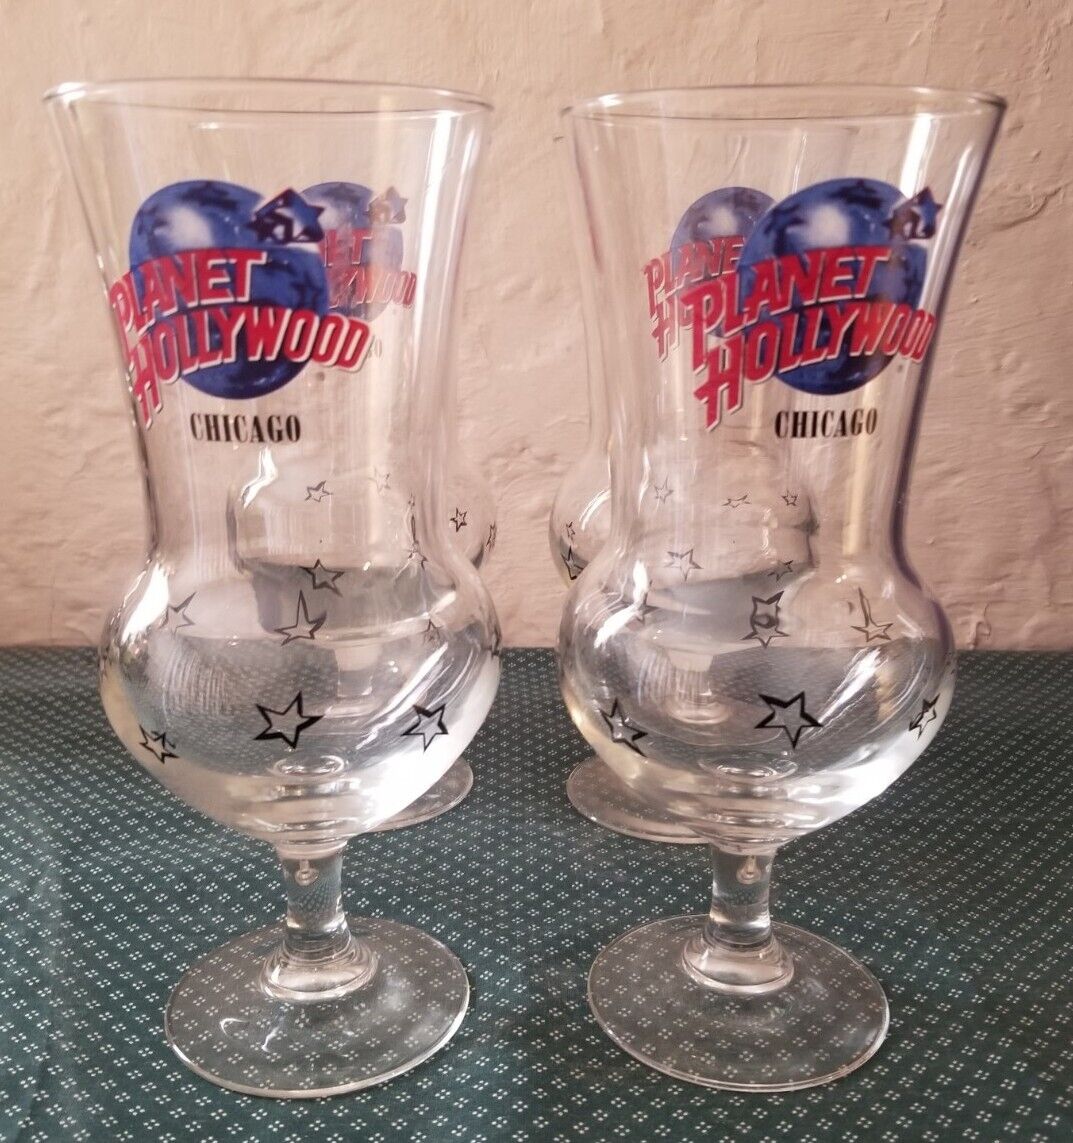 Vintage Planet Hollywood Chicago Lot of 4 Hurricane Cocktail Glasses